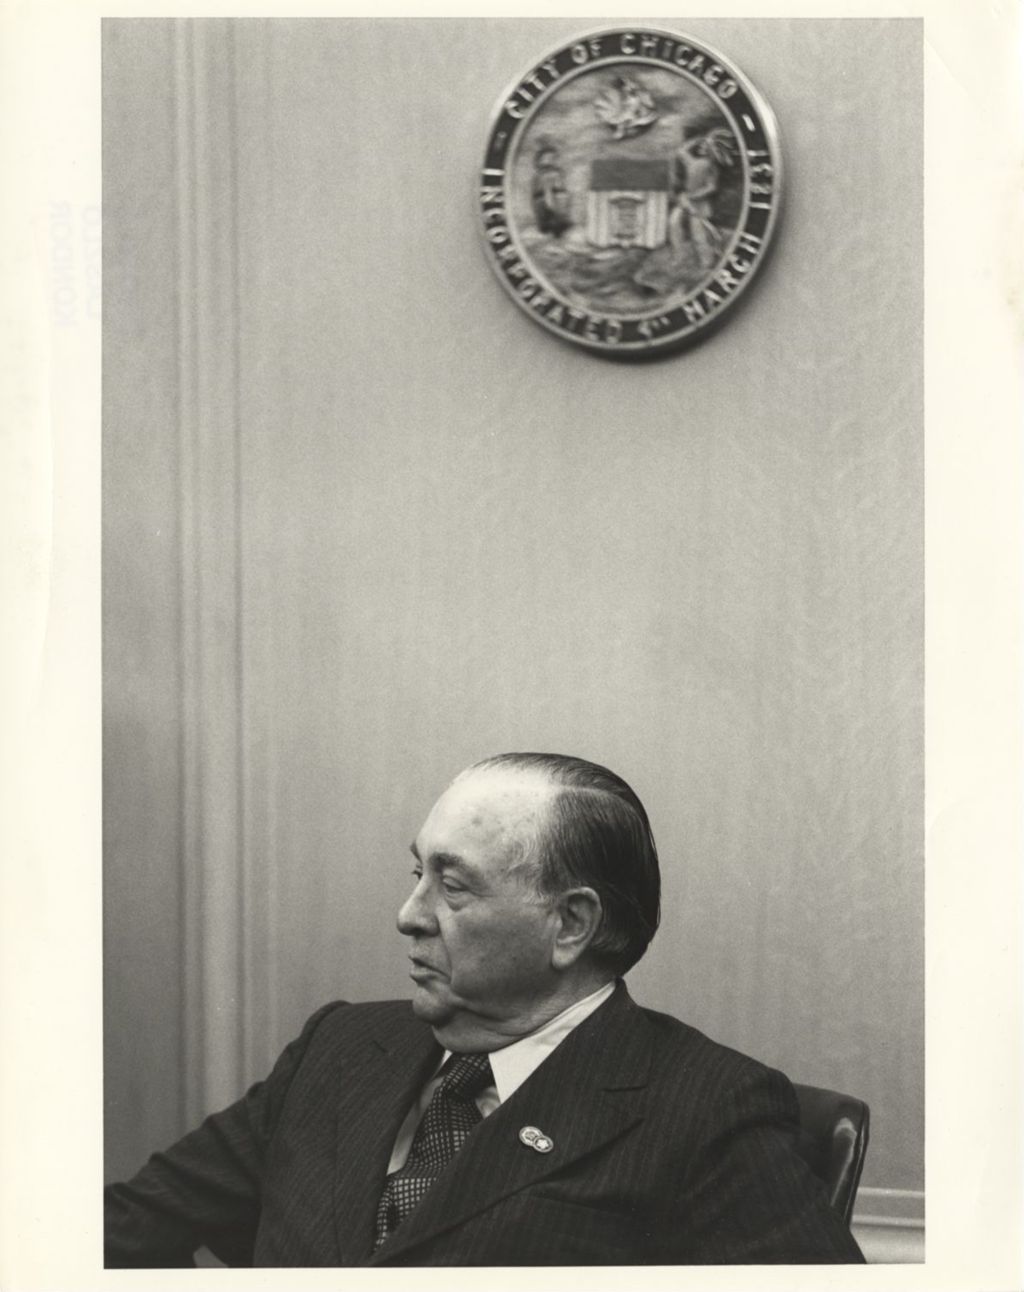 Richard J. Daley in his office